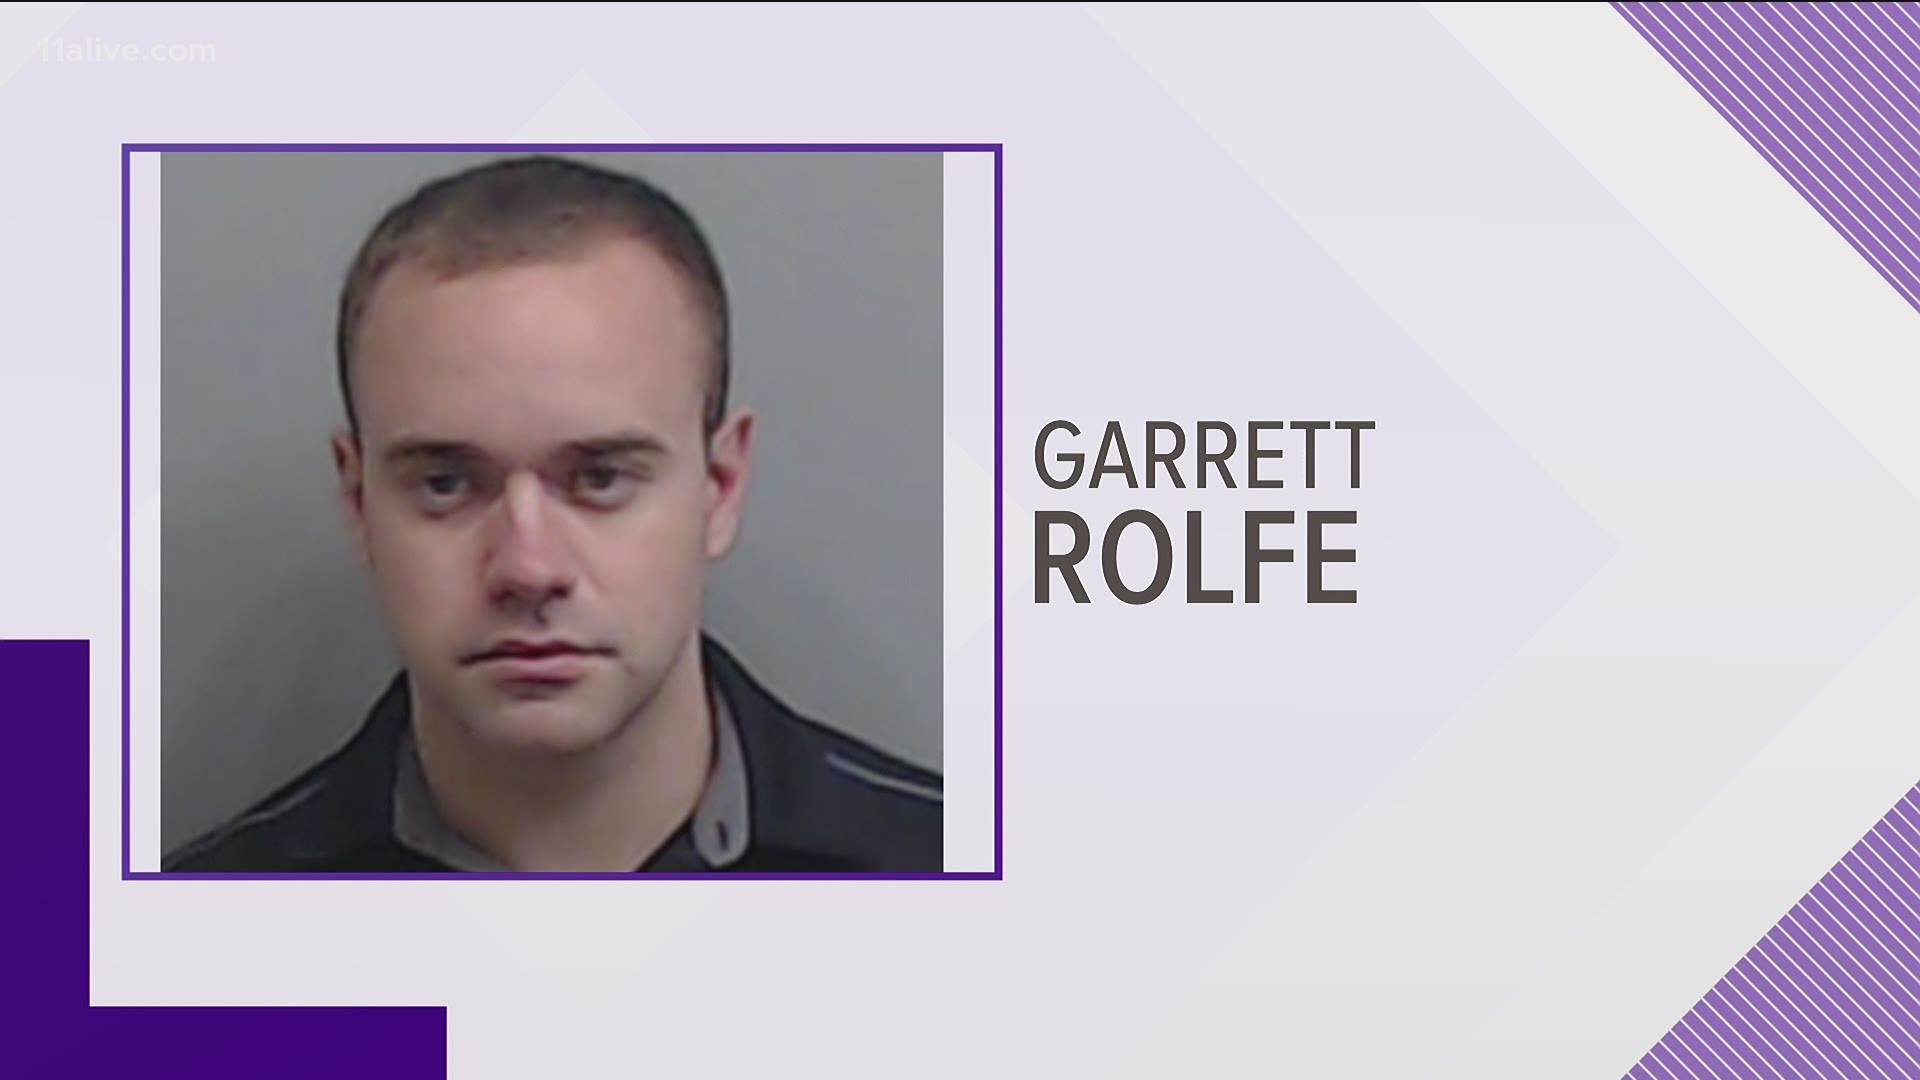 Rolfe is the ex-officer facing charges in the Rayshard Brooks case.